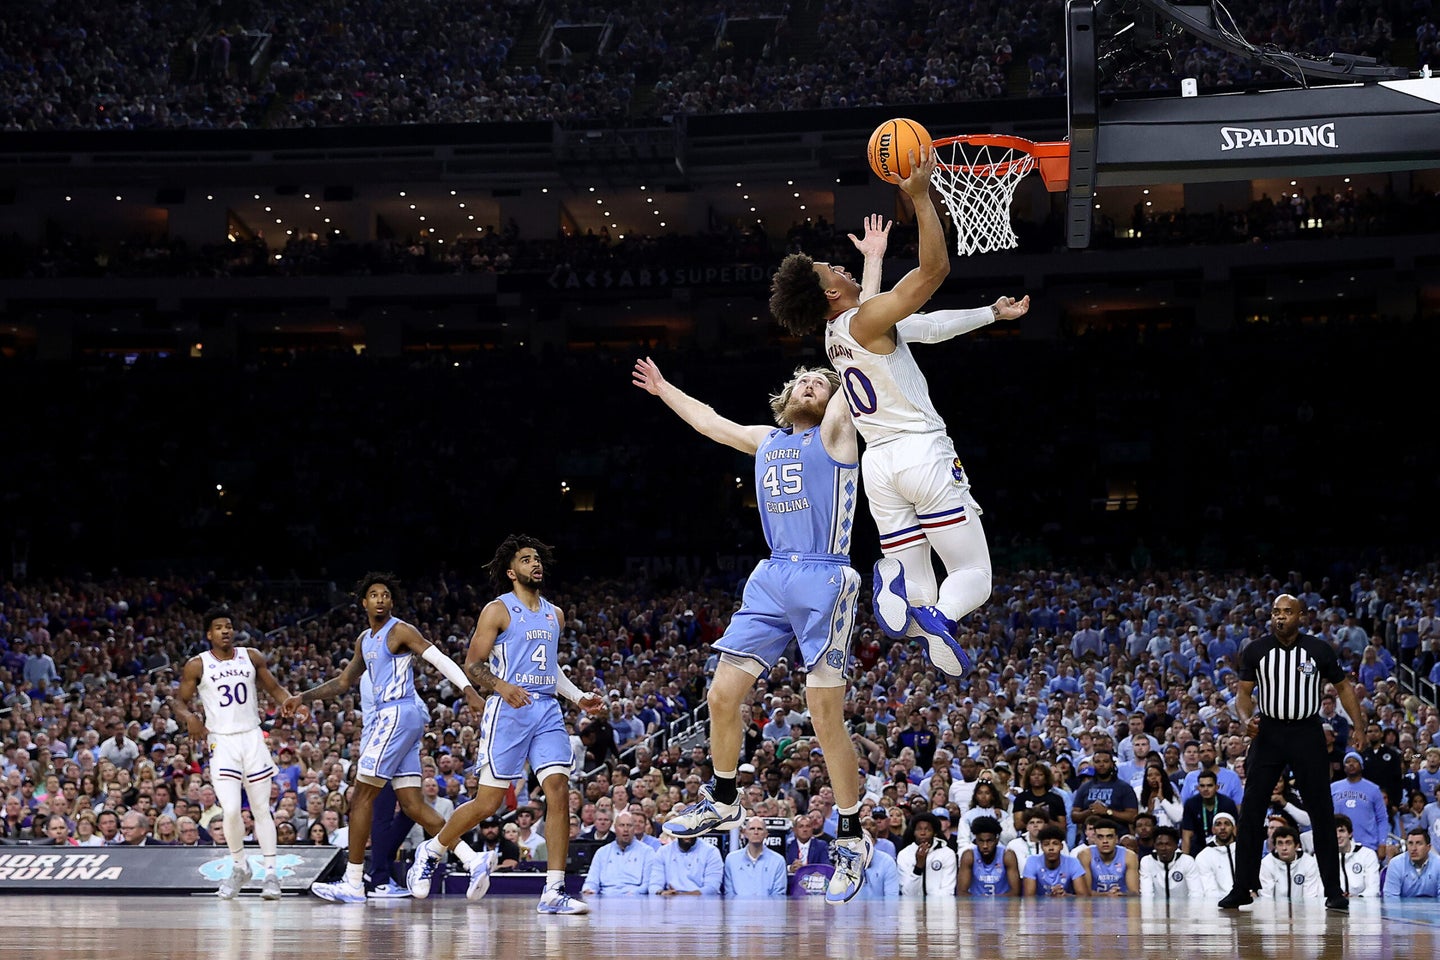 Jalen Wilson #10 of the Kansas Jayhawks shoots the ball as Brady Manek #45 of the North Carolina Tar Heels defends in the first half of the game during the 2022 NCAA Men's Basketball Tournament National Championship.